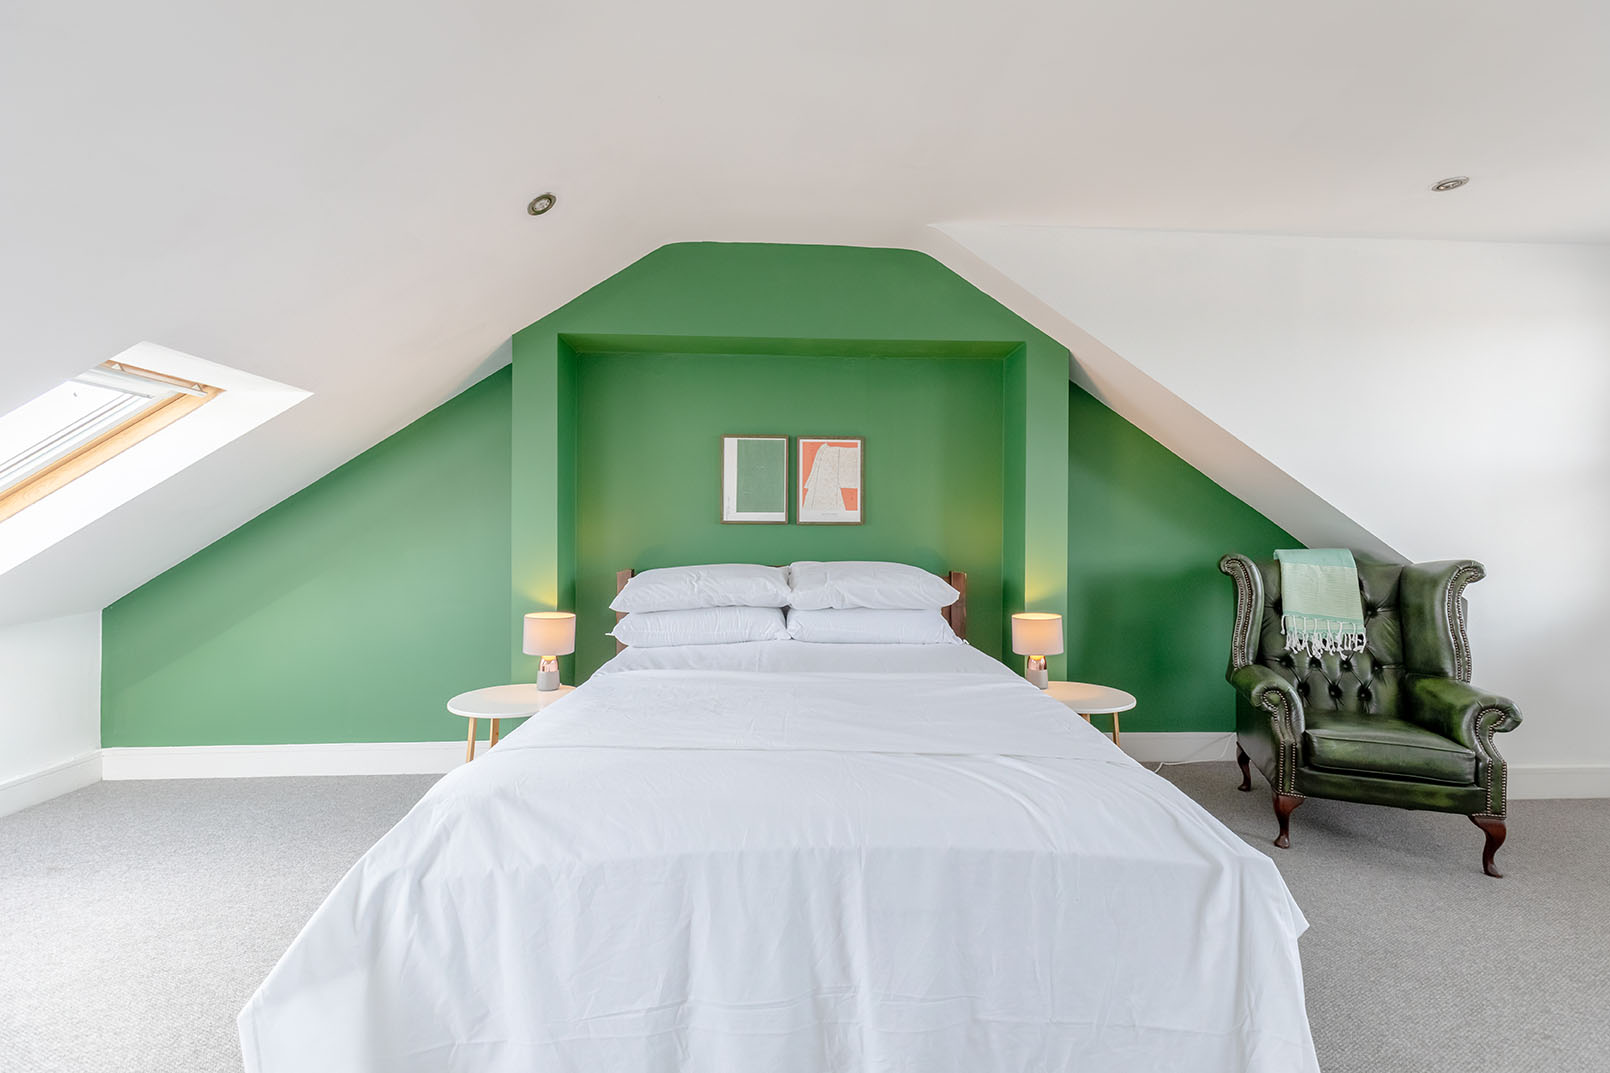 A bright attic bedroom with an accent bright green wall, white linens and a nice green armchair next to the bed, direct angle from the end of the bed.